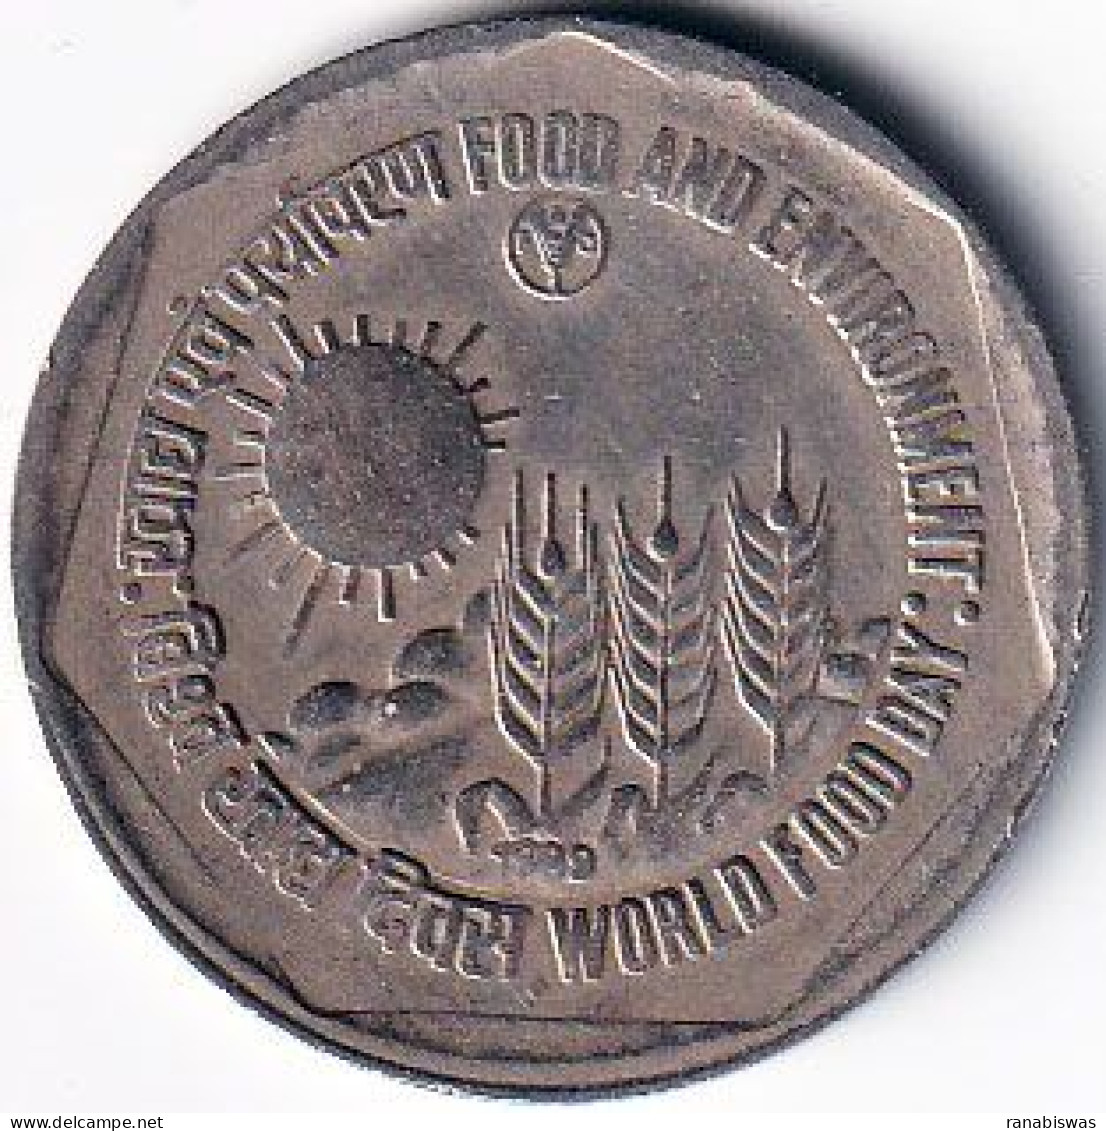 INDIA COIN LOT 33, 1 RUPEE 1989, FOOD & ENVIRONMENT, FAO, BOMBAY MINT, XF, SCARE - Inde